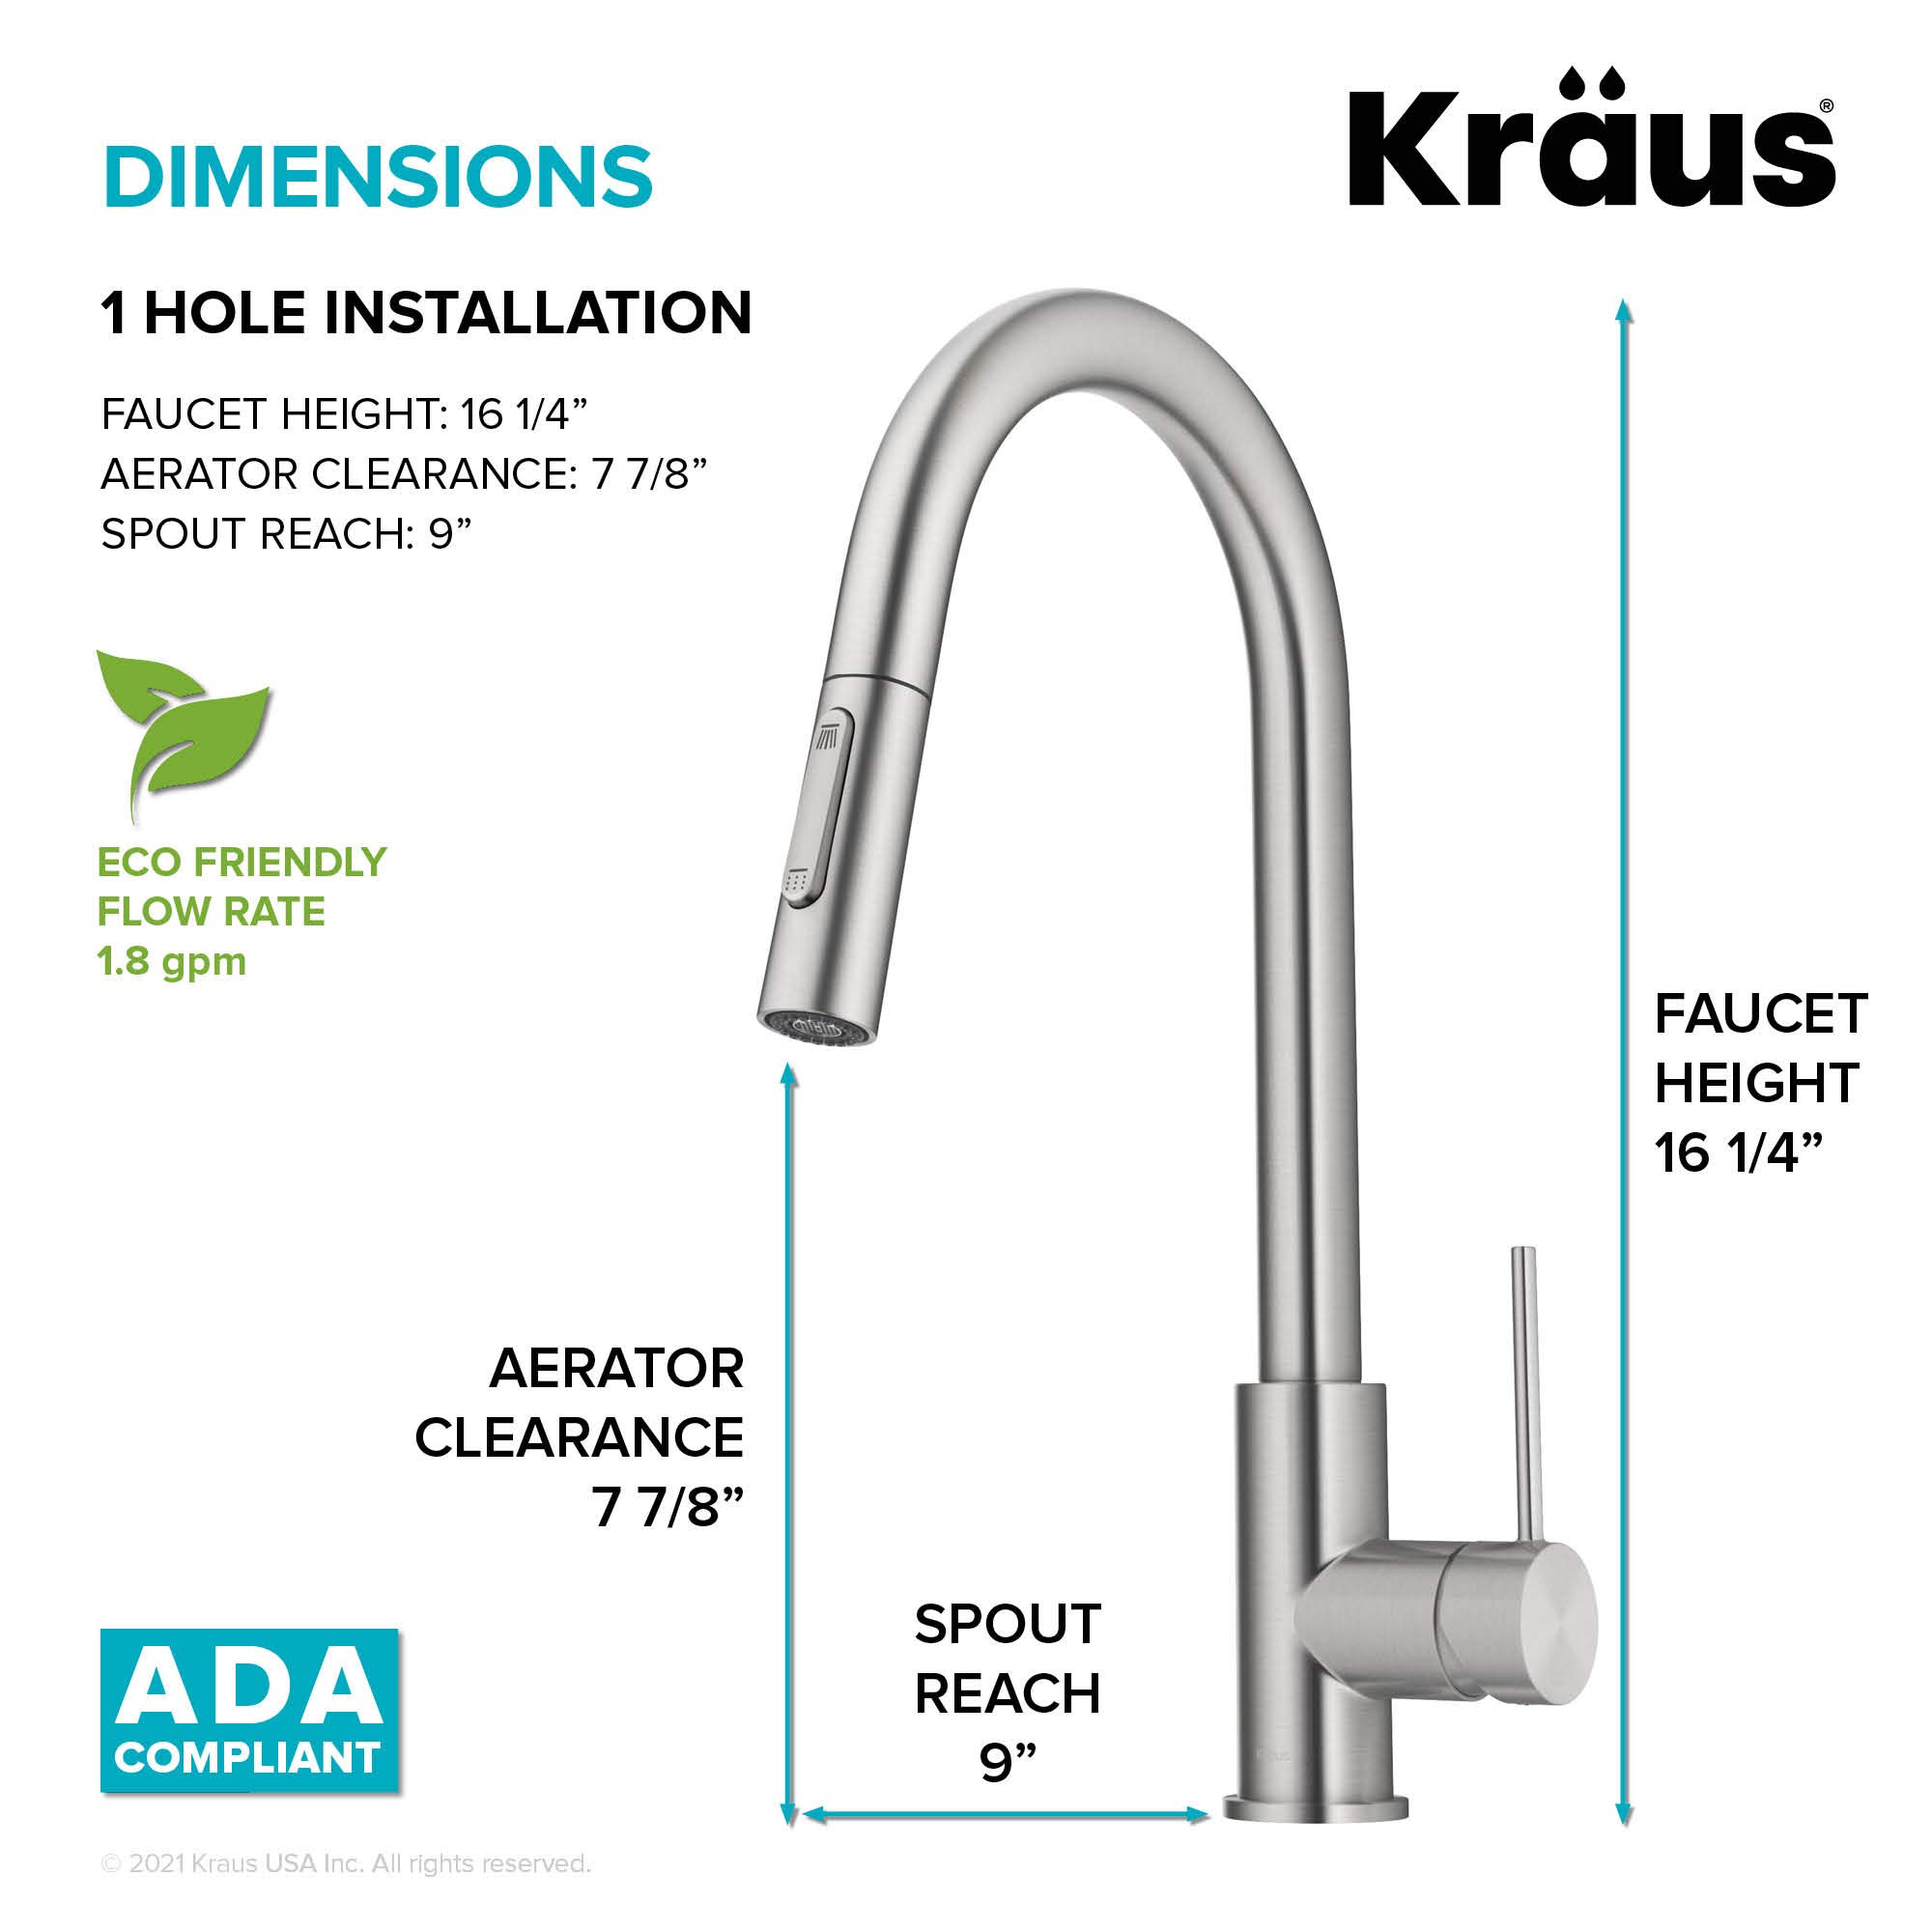 Kraus KPF-3104SFS Oletto Contemporary Pull-Down Single Handle Kitchen Faucet, 16.25 inch, Spot Free Stainless Steel